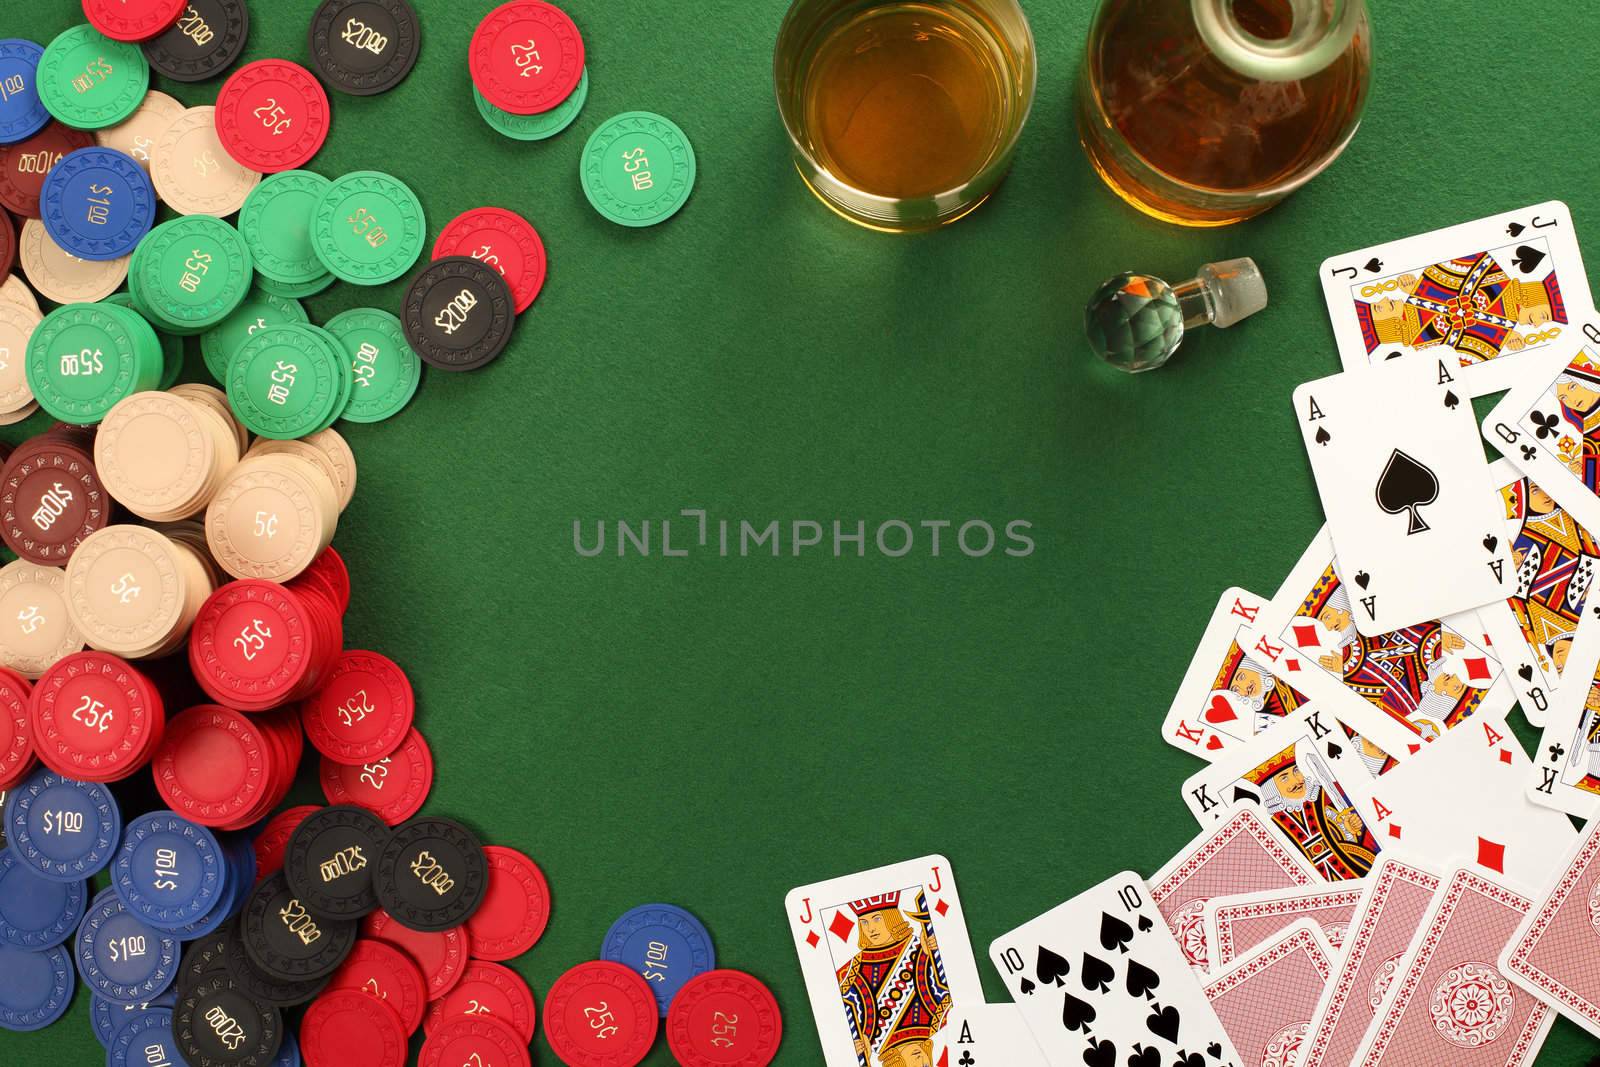 Photo of a poker table with gambling chips, cards and whisky.